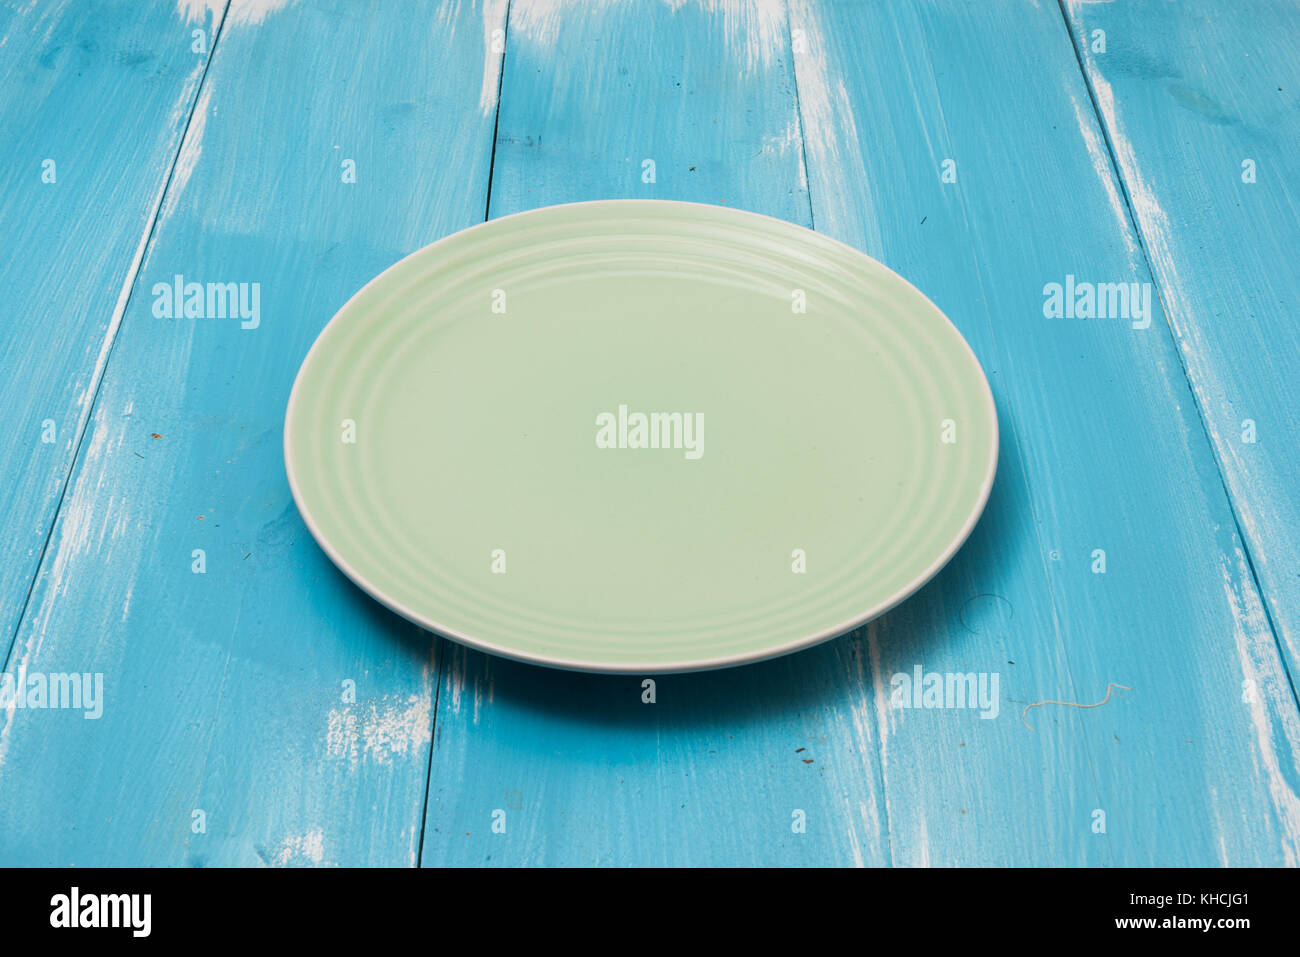 Green Round plate on blue wooden table with perspective side view Stock Photo